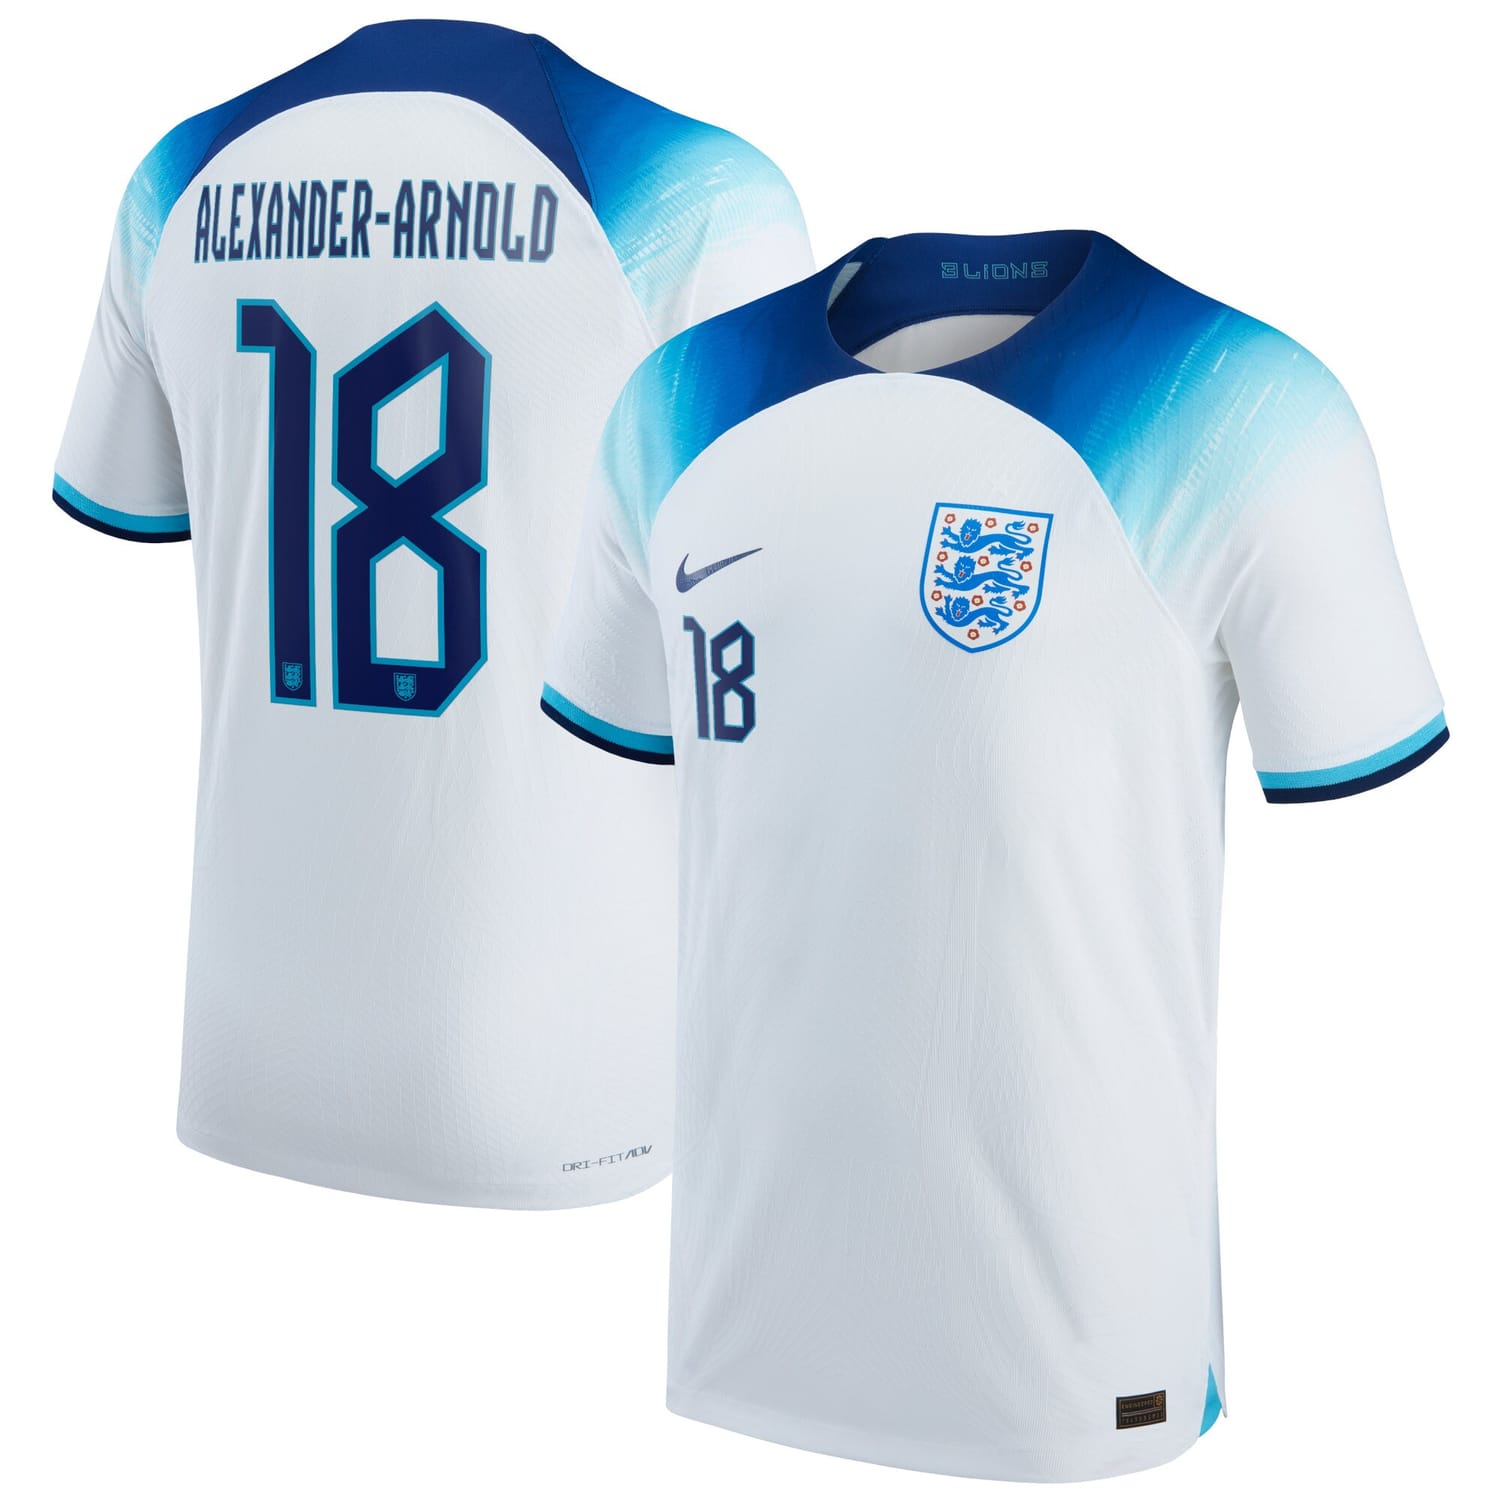 England National Team Home Authentic Jersey Shirt 2022 player Trent Alexander-Arnold 18 printing for Men